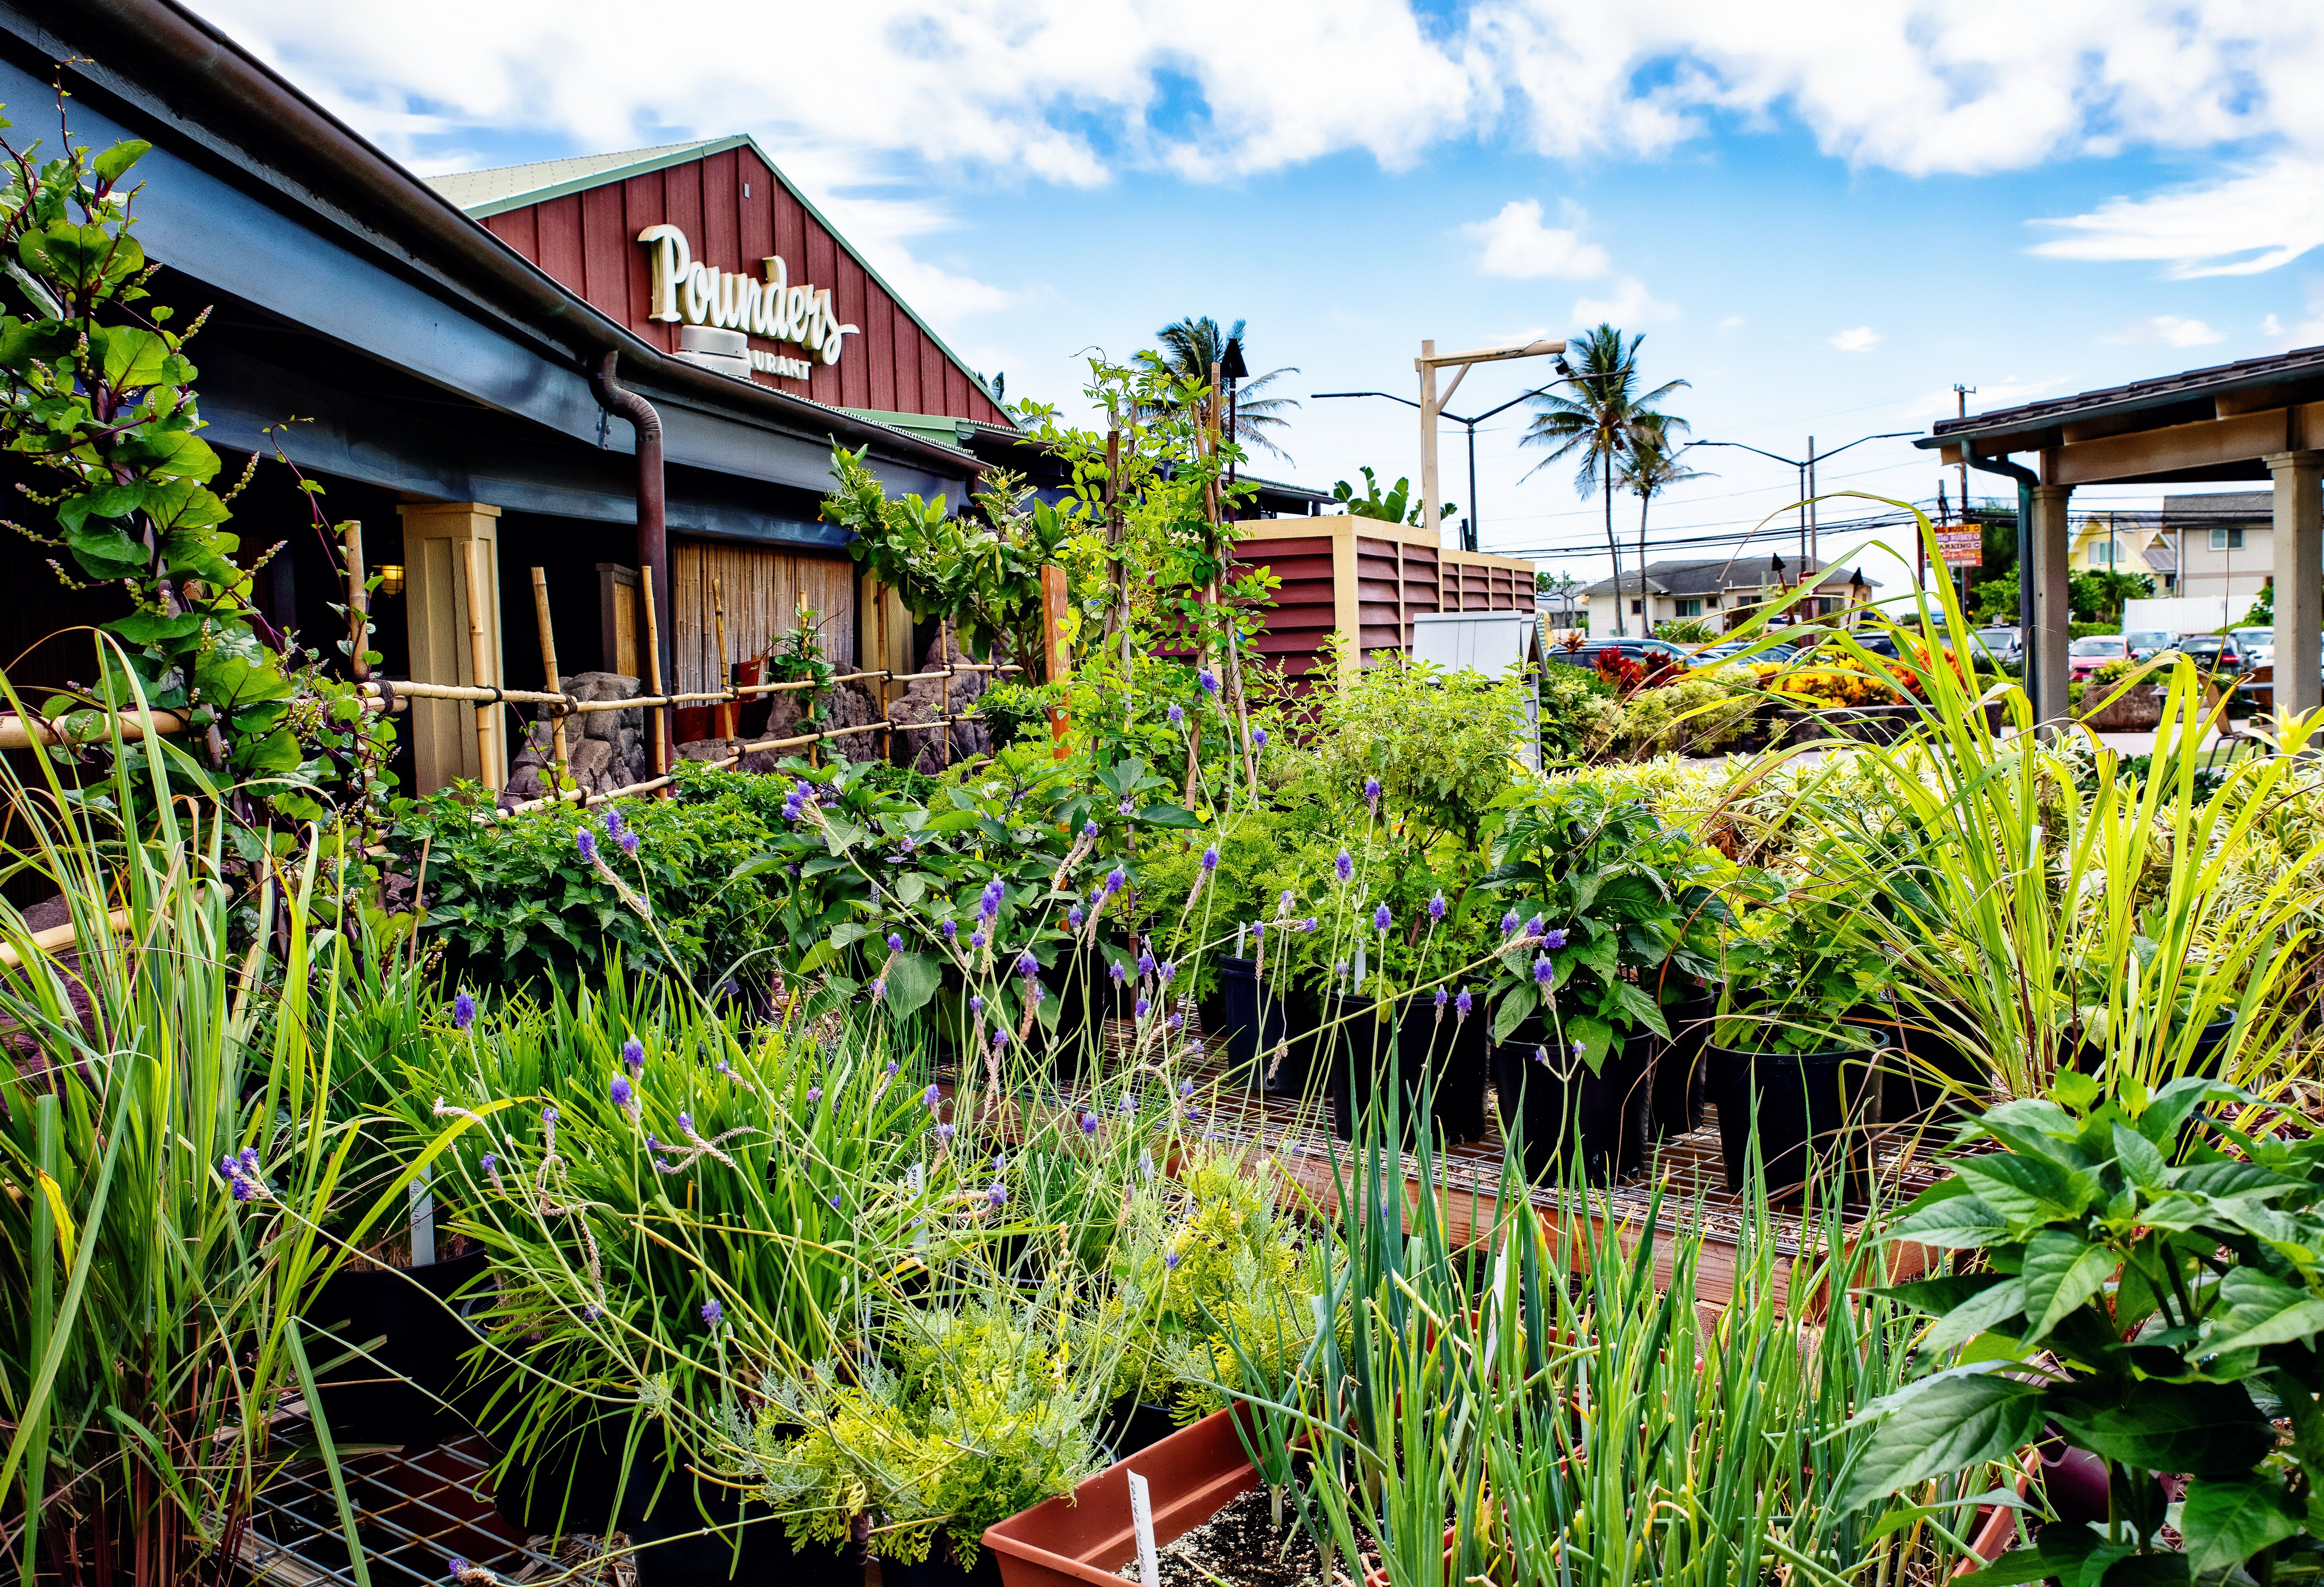 Photo of the garden area for Pounders Restaurant at the Hukilau Marketplace